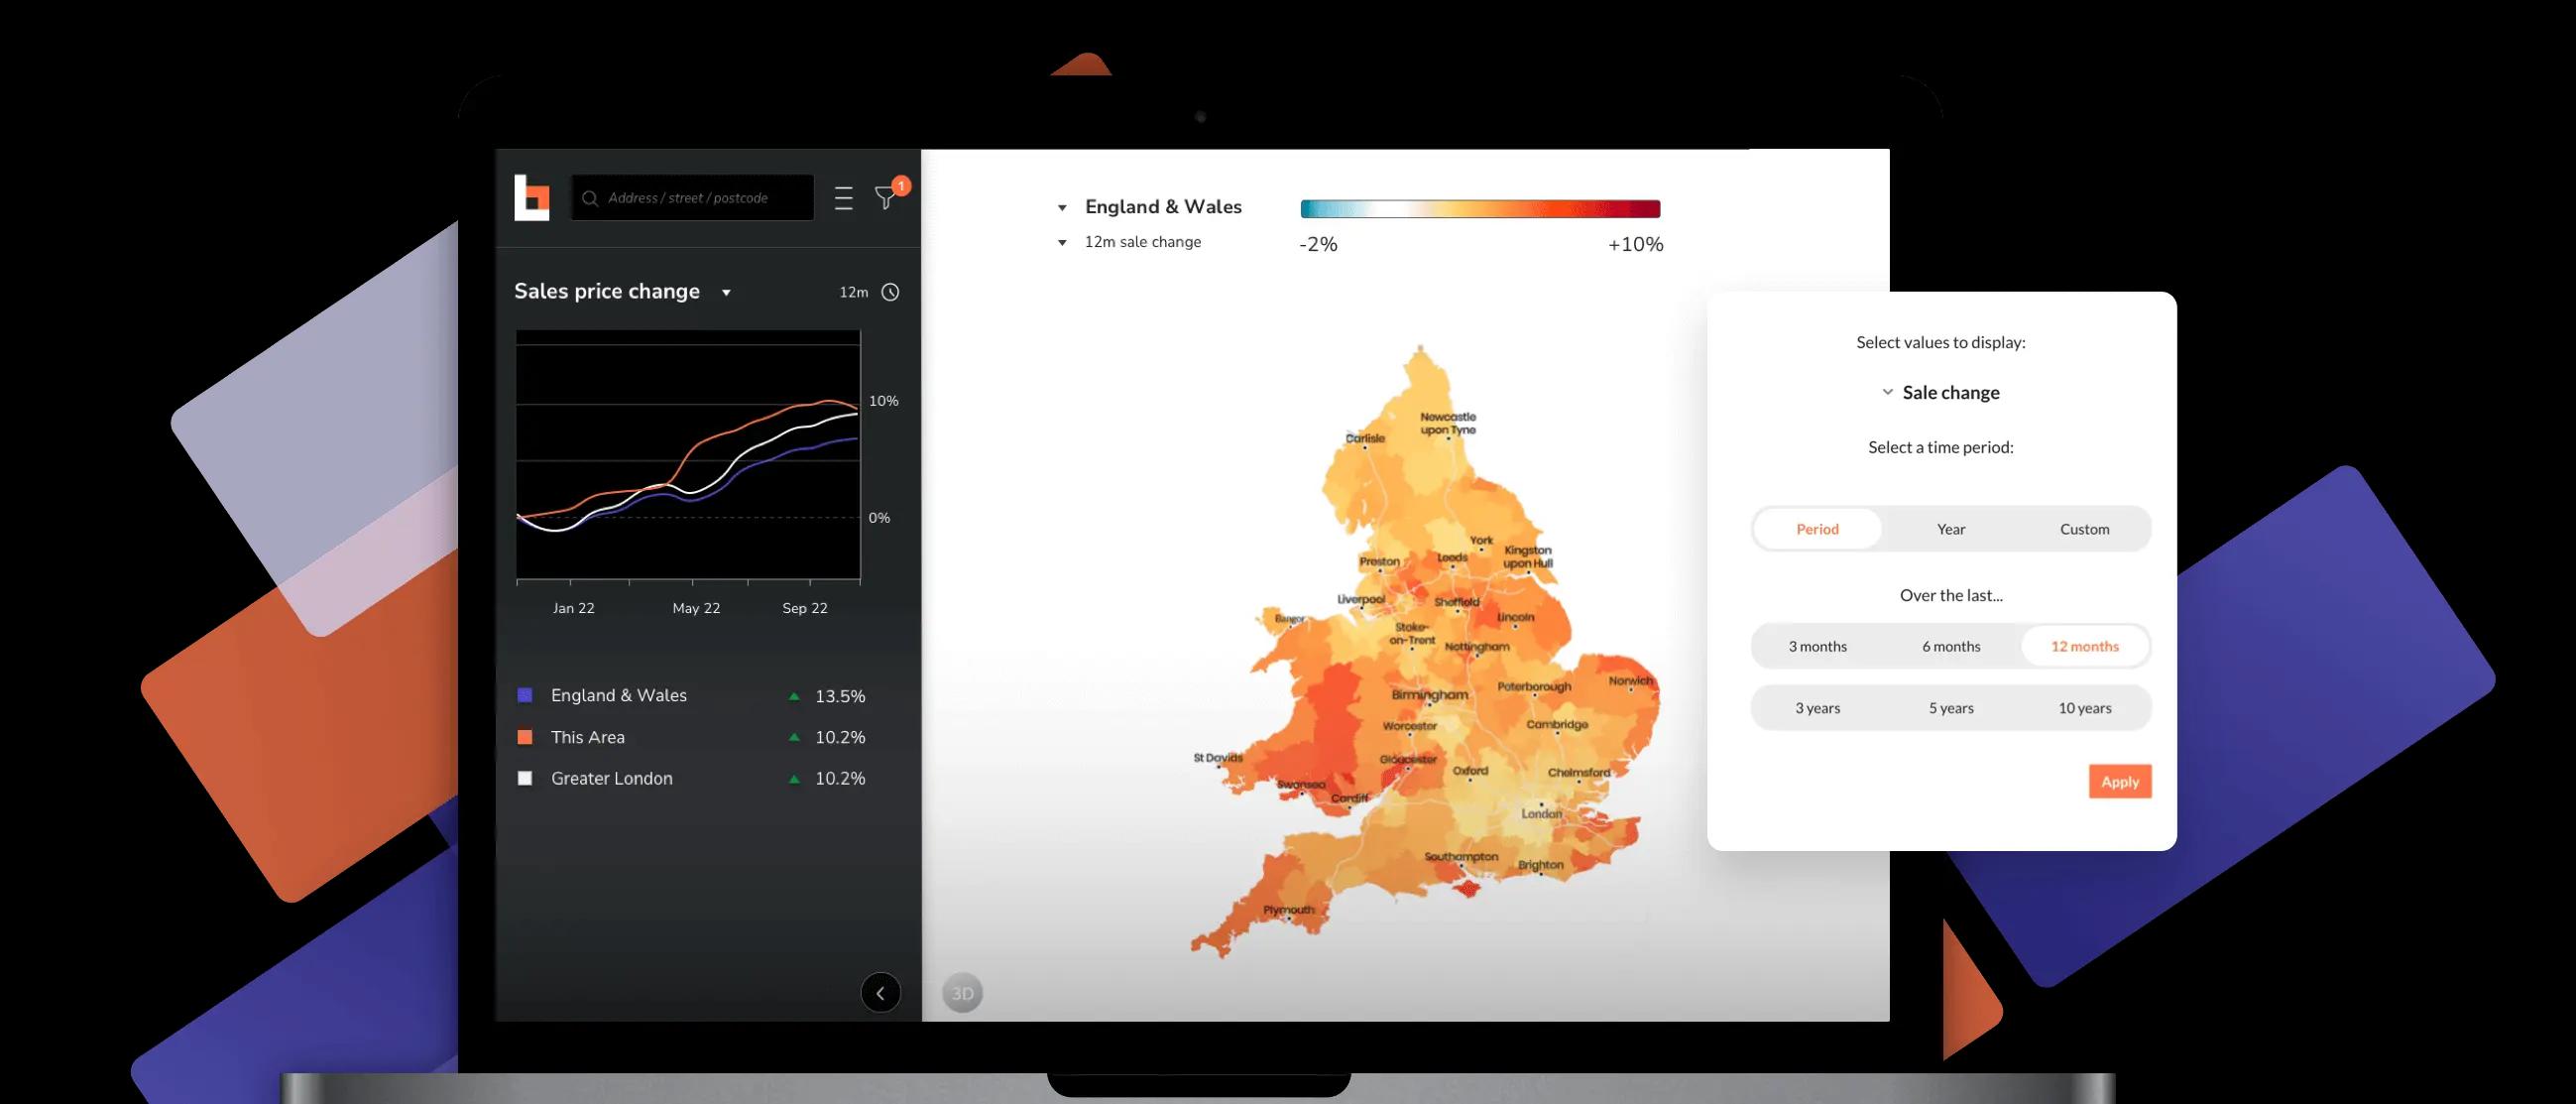 Sign up for free for detailed maps and charts analysing the property market in England & Wales